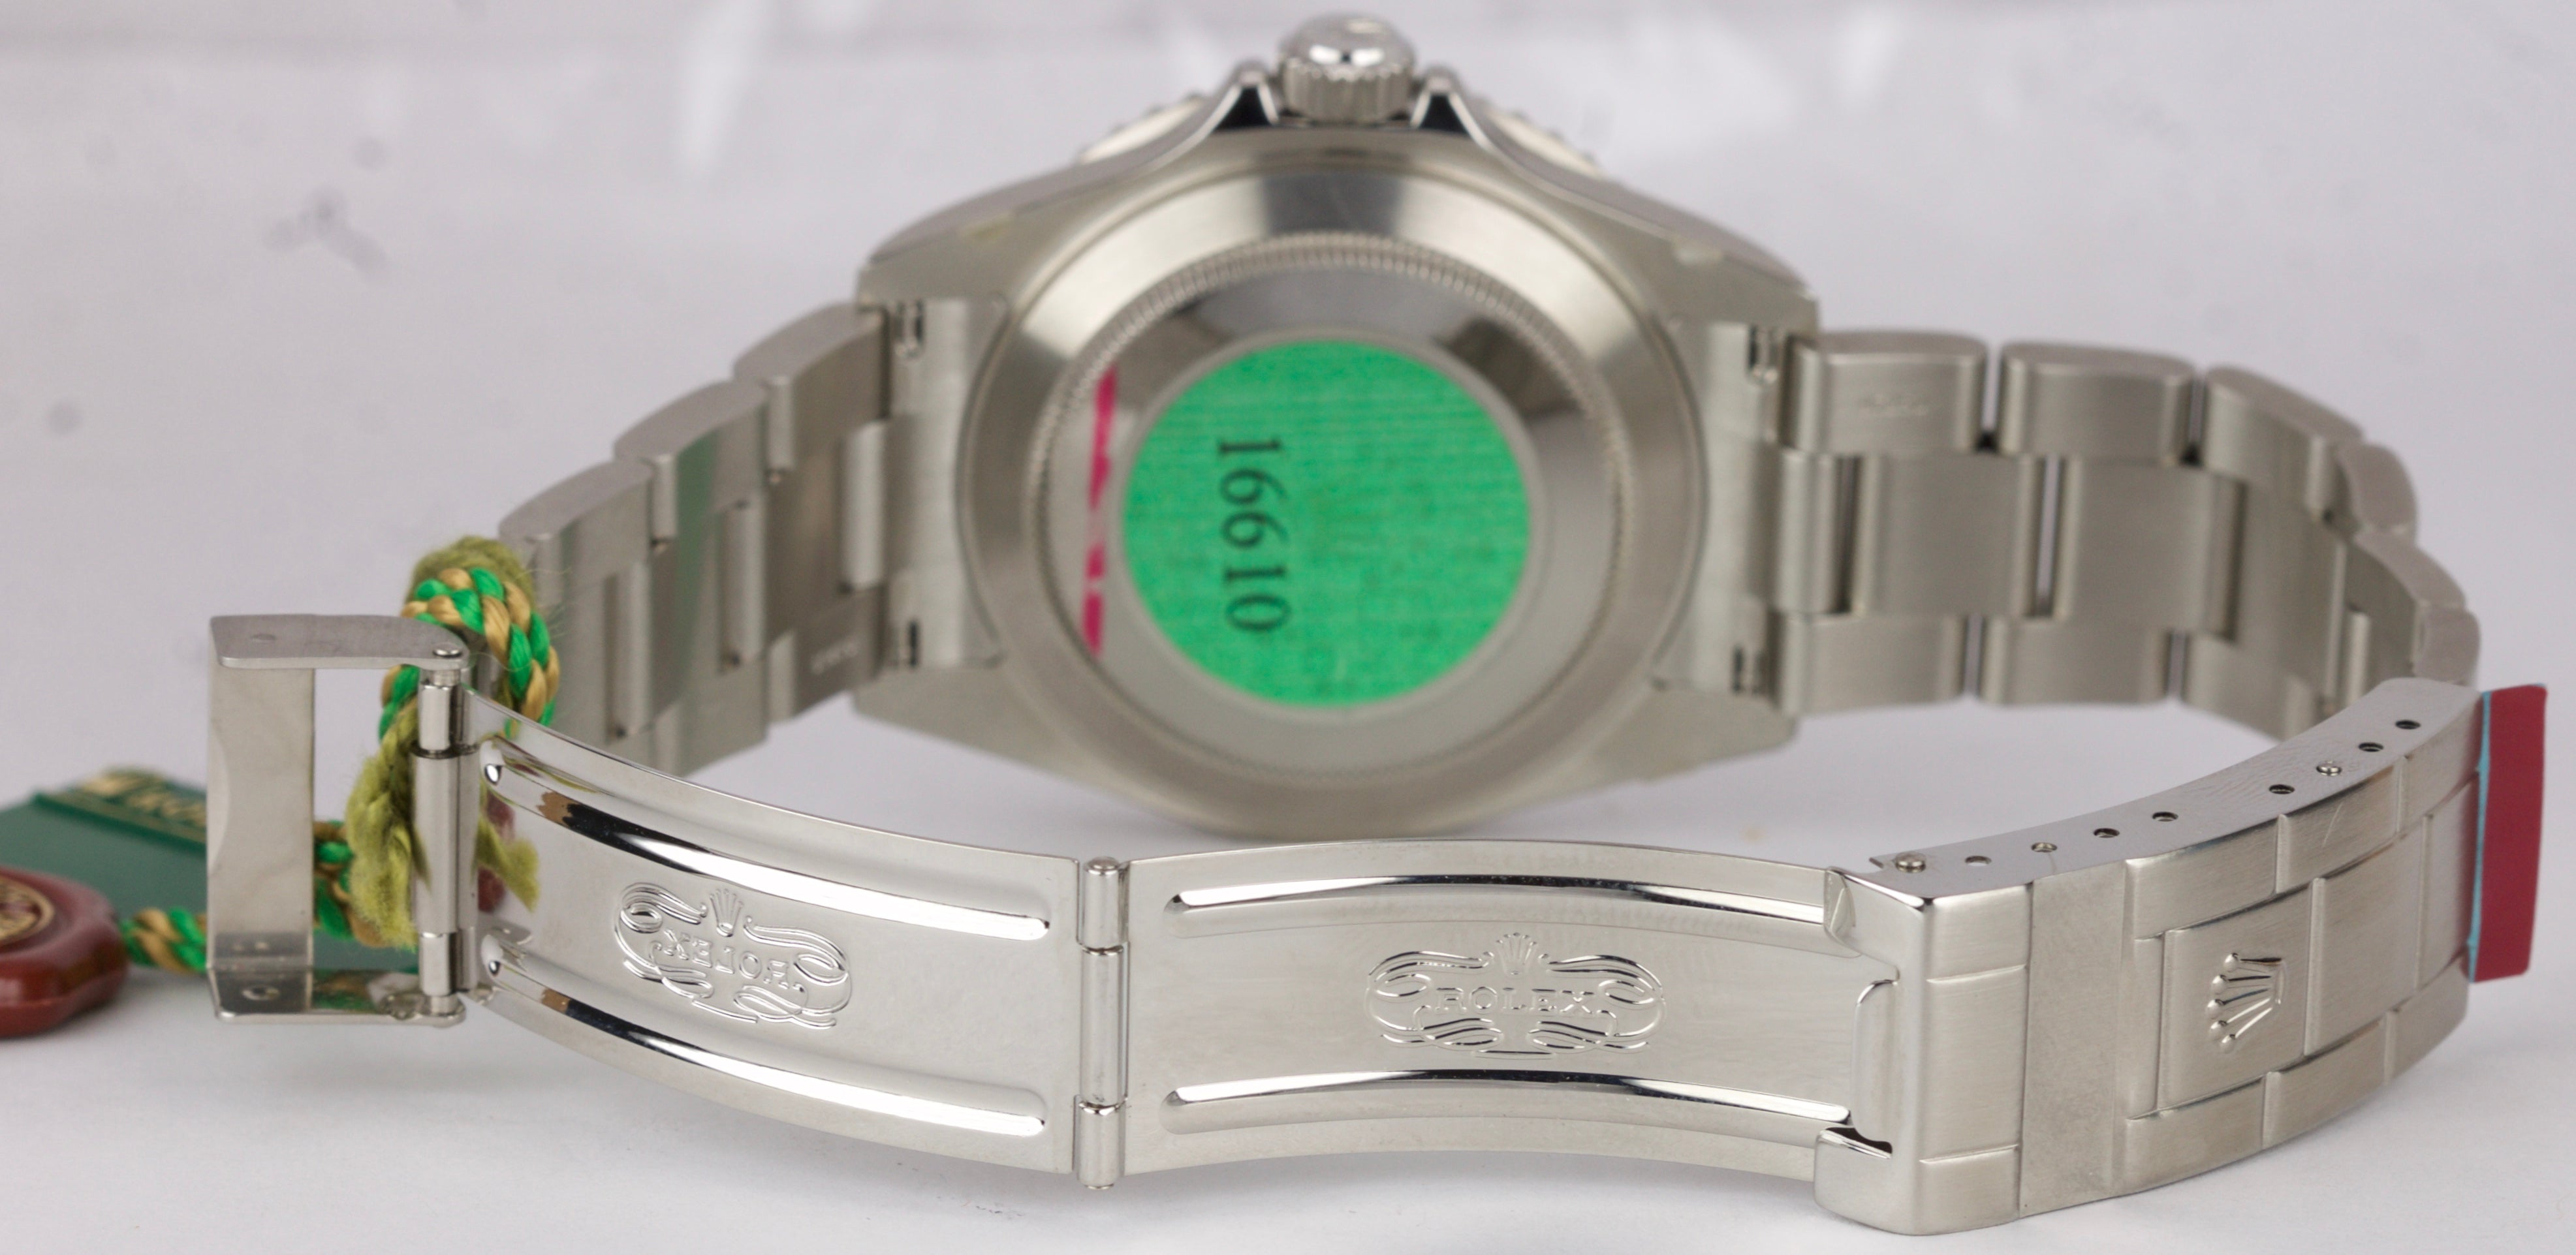 Submariner 'Kermit Flat 4', reference 16610LV Montre bracelet en acier avec  date, Stainless steel wristwatch with date and bracelet Vers 2003, Circa  2003, Fine Watches, 2023